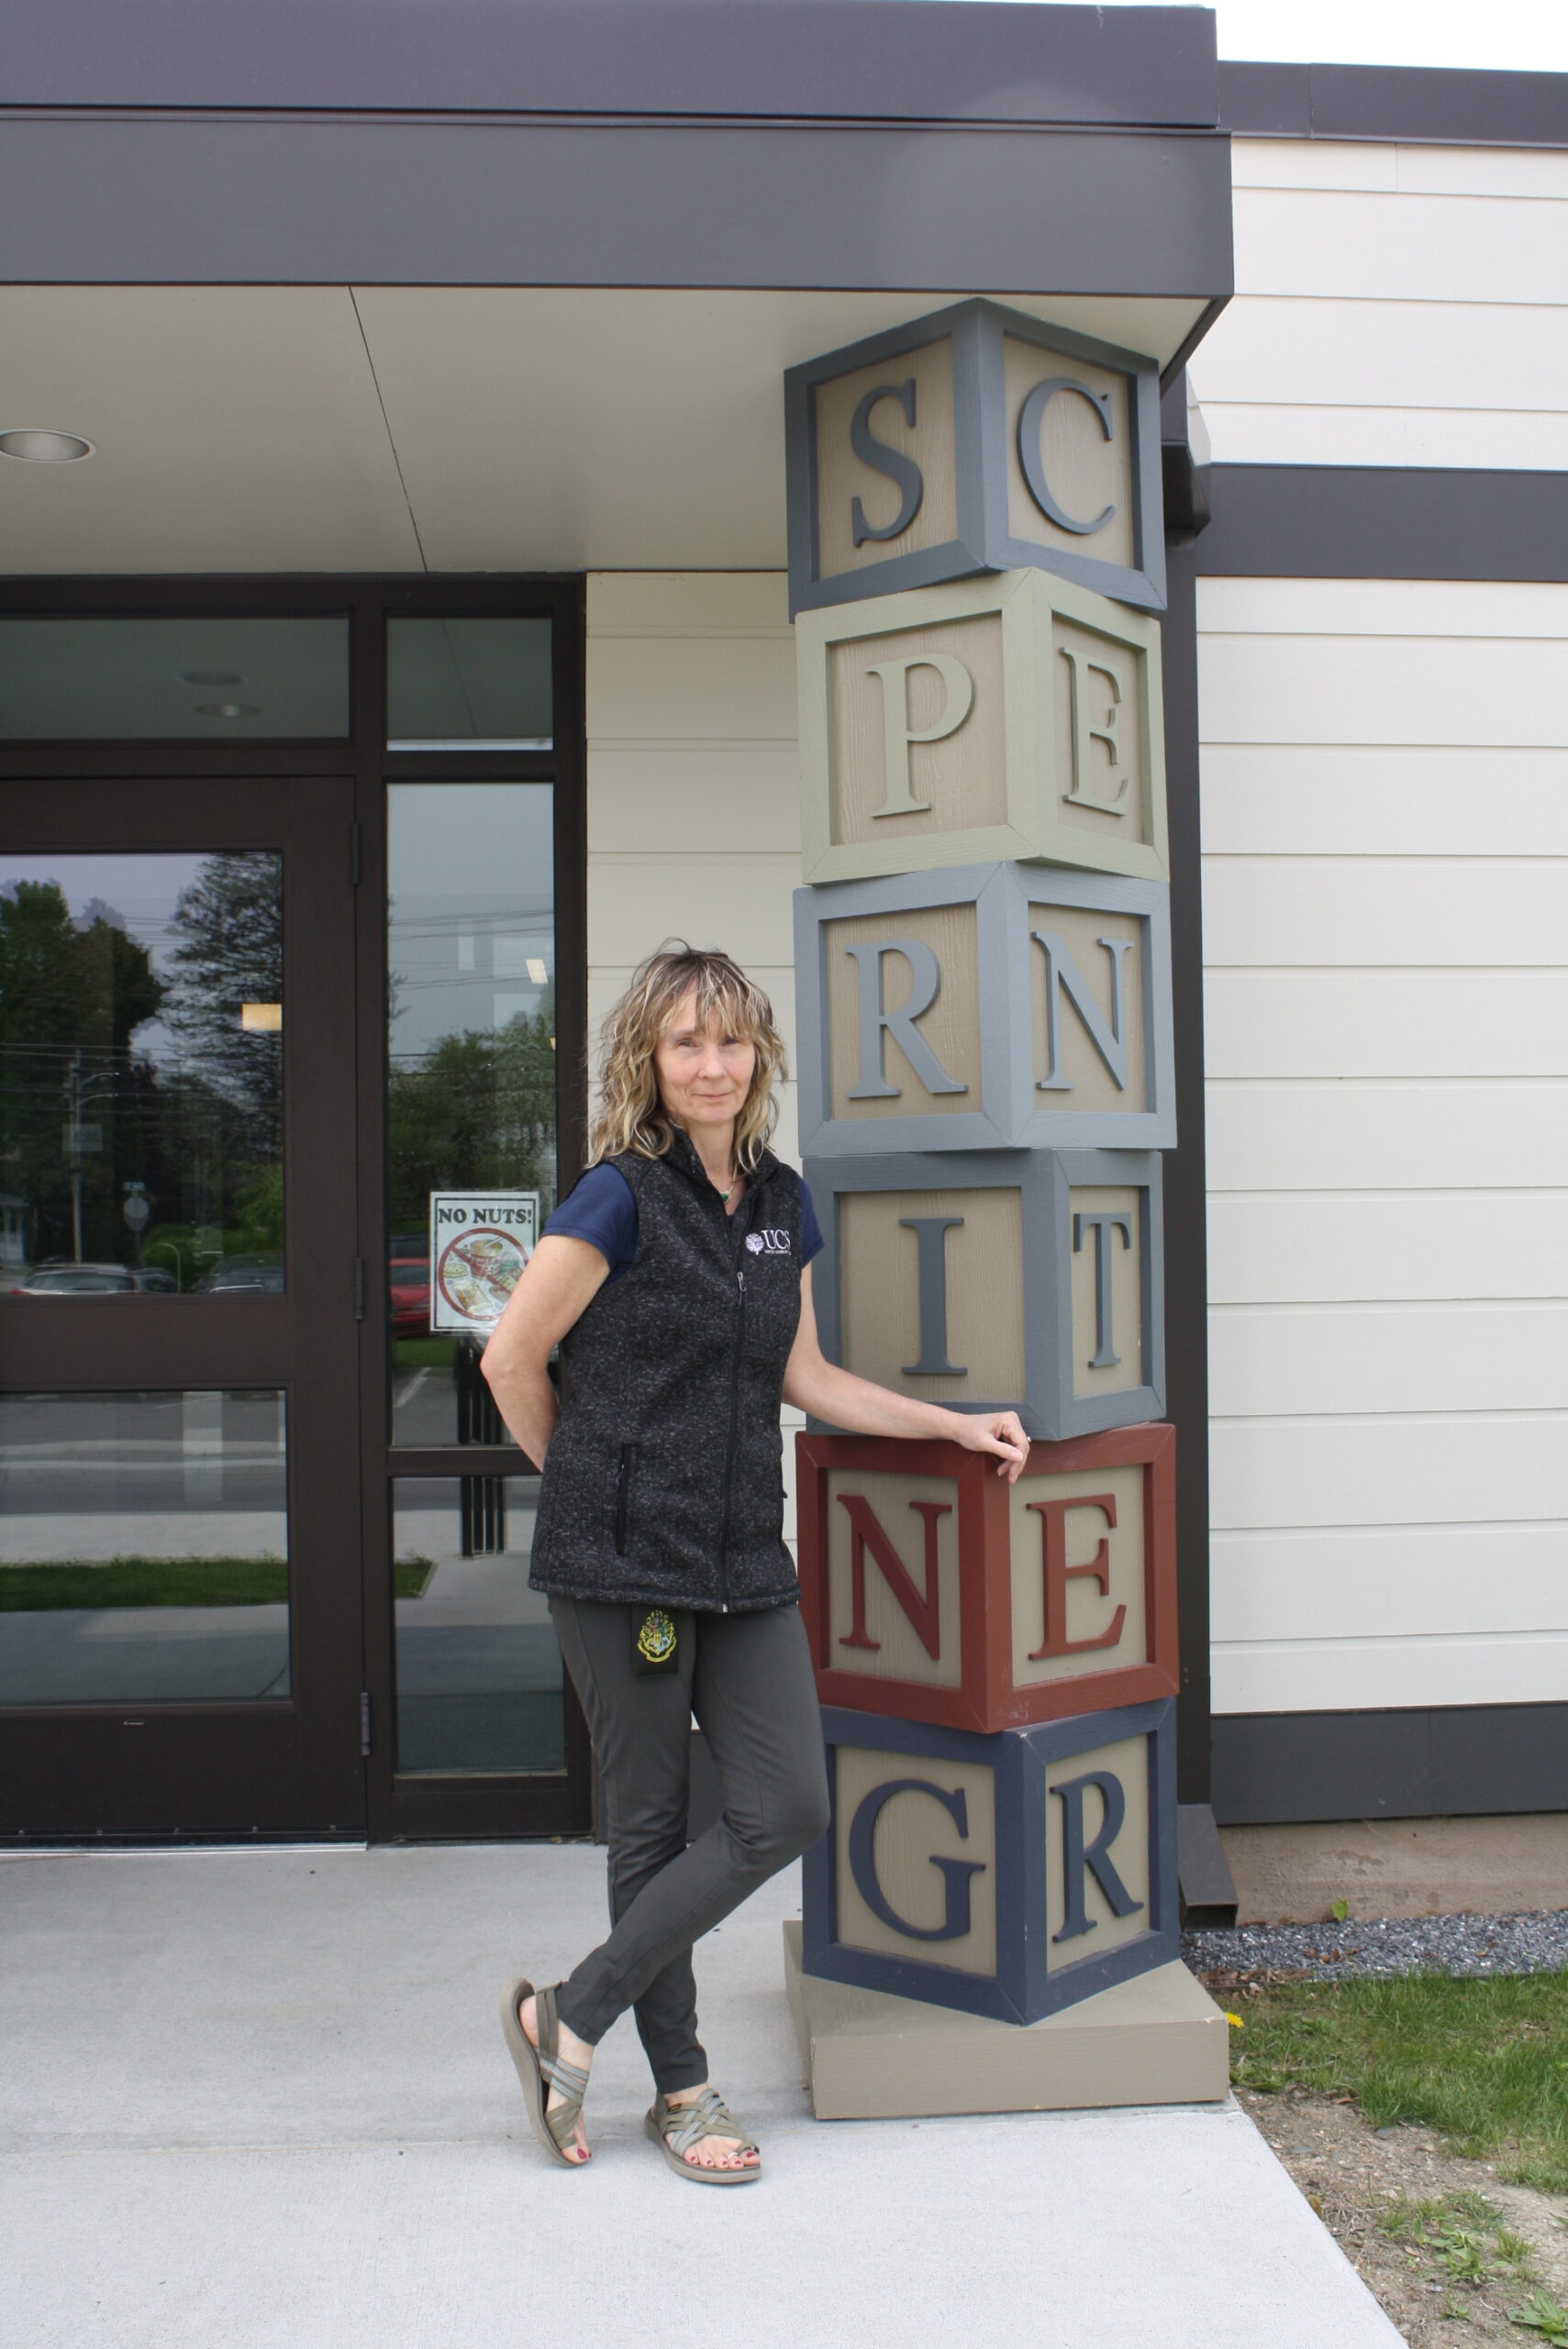 A thin woman with curly blonde hair wearing a black vest and grey pants stands in front of a modern building with a pillar spelling "spring" that looks like children's building blocks.